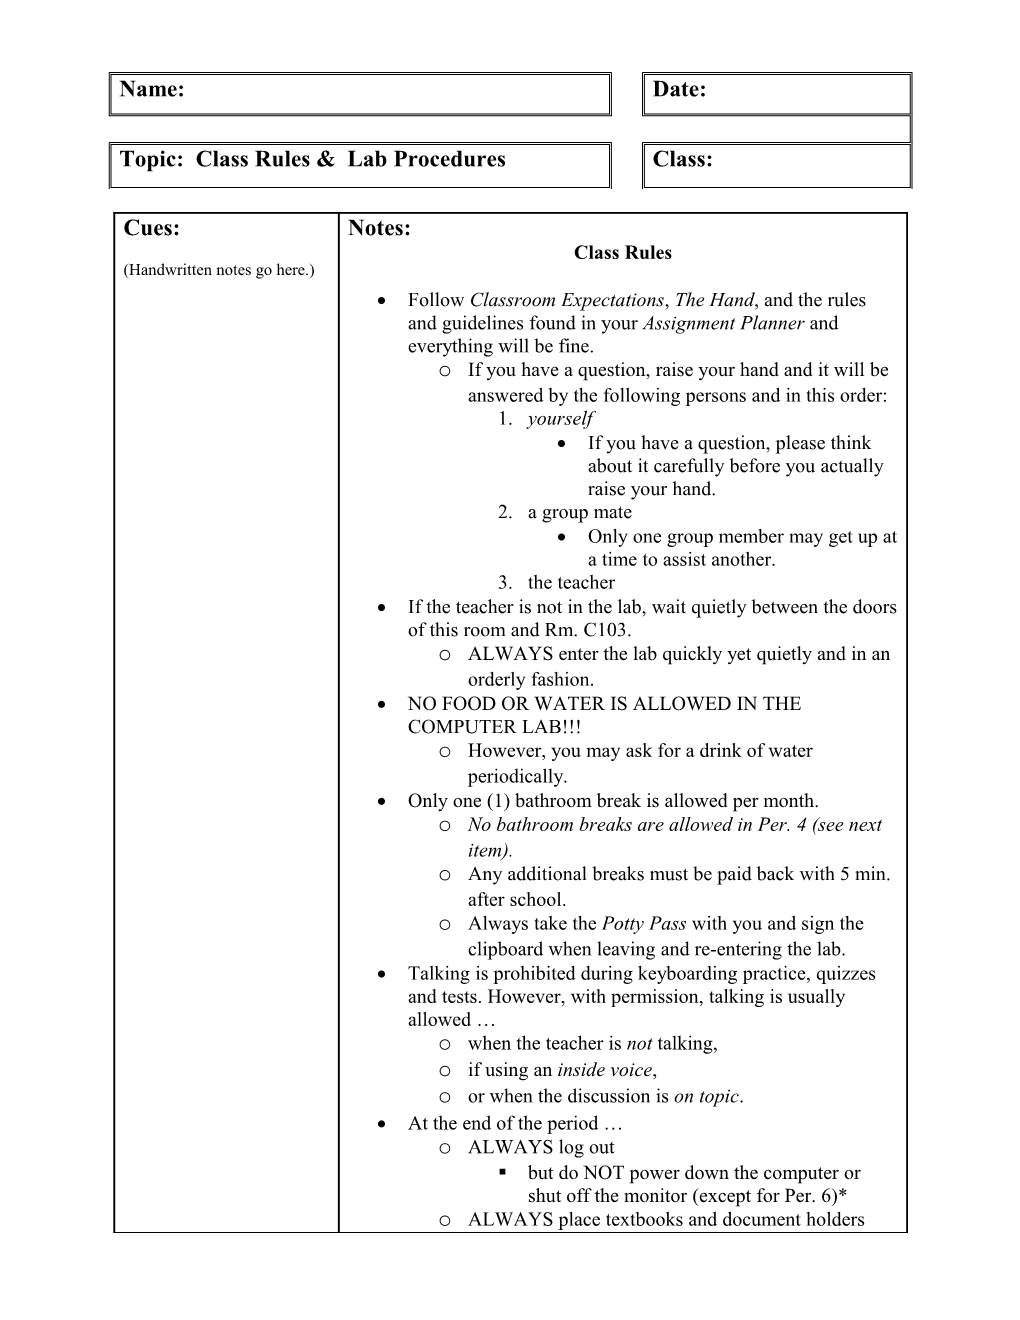 Follow Classroom Expectations,The Hand, and the Rules and Guidelines Found in Your Assignment